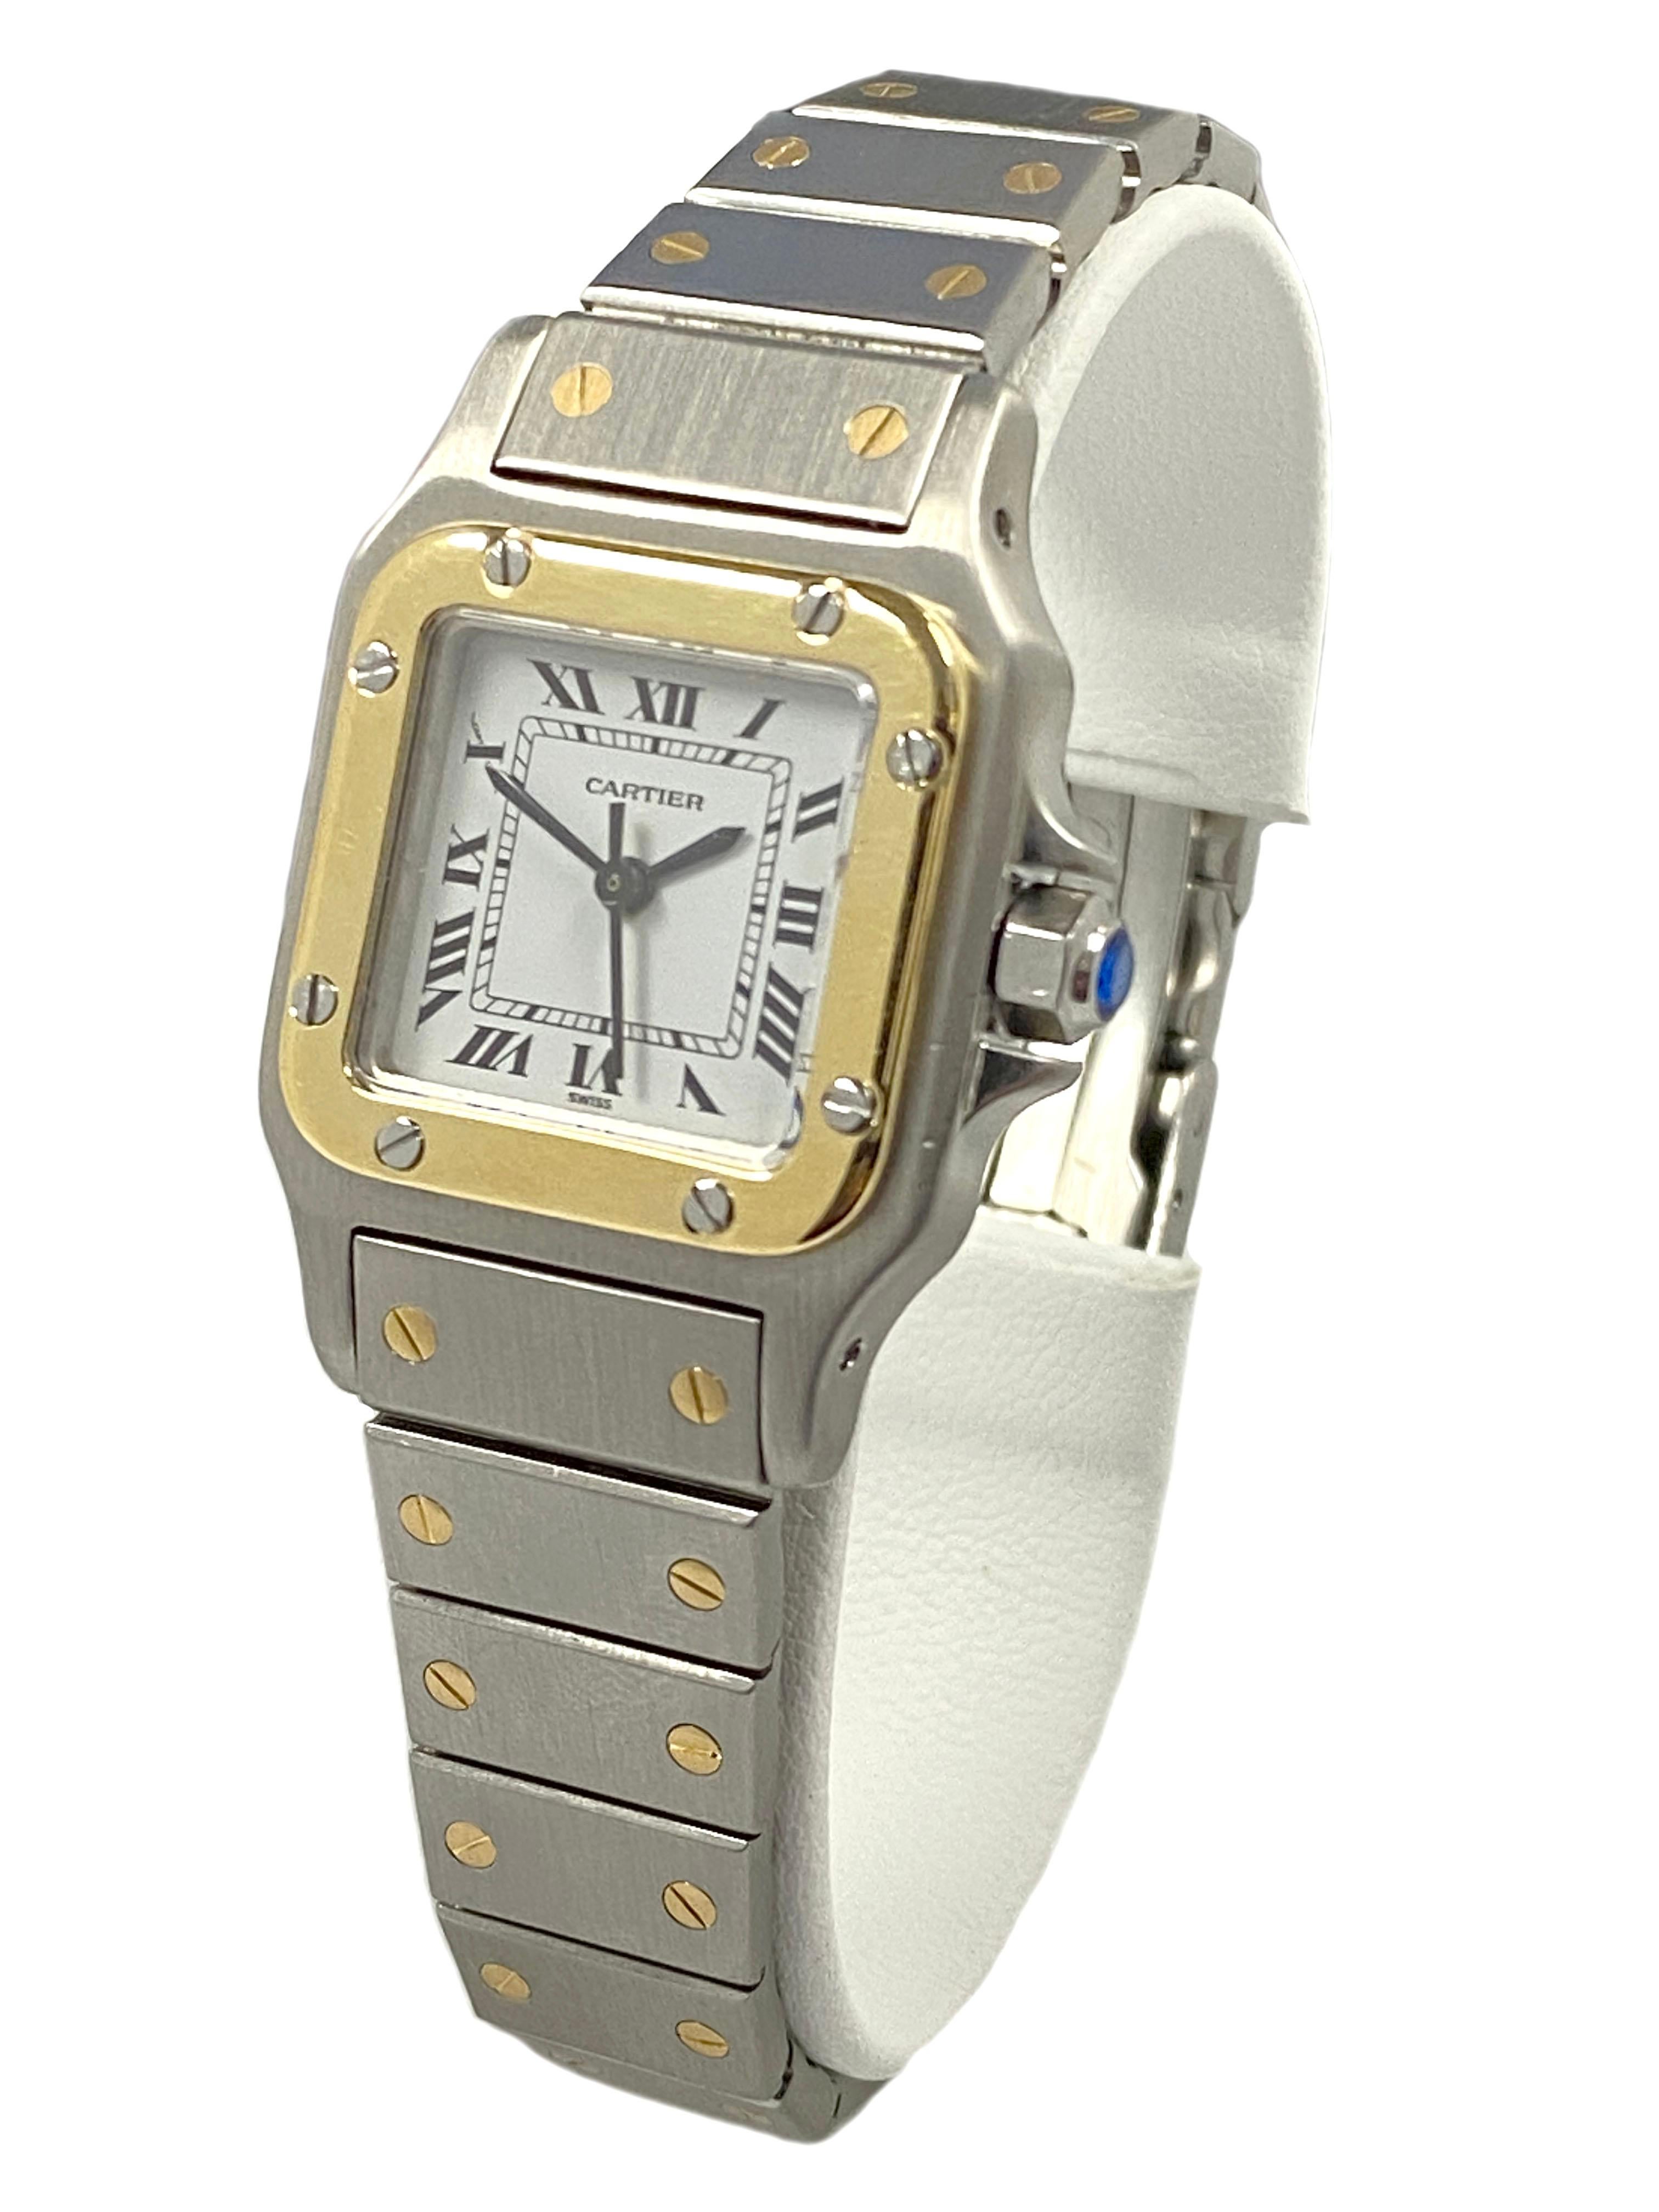 Circa 2005 Cartier Santos Ladies Wrist Watch, 34 X 24 MM Stainless Steel case with 18K yellow Gold Bezel. Automatic, Self Winding Movement, White Dial with Black Roman Numerals and a sapphire crown. 1/2 inch wide Stainless Steel and 18K Yellow Gold